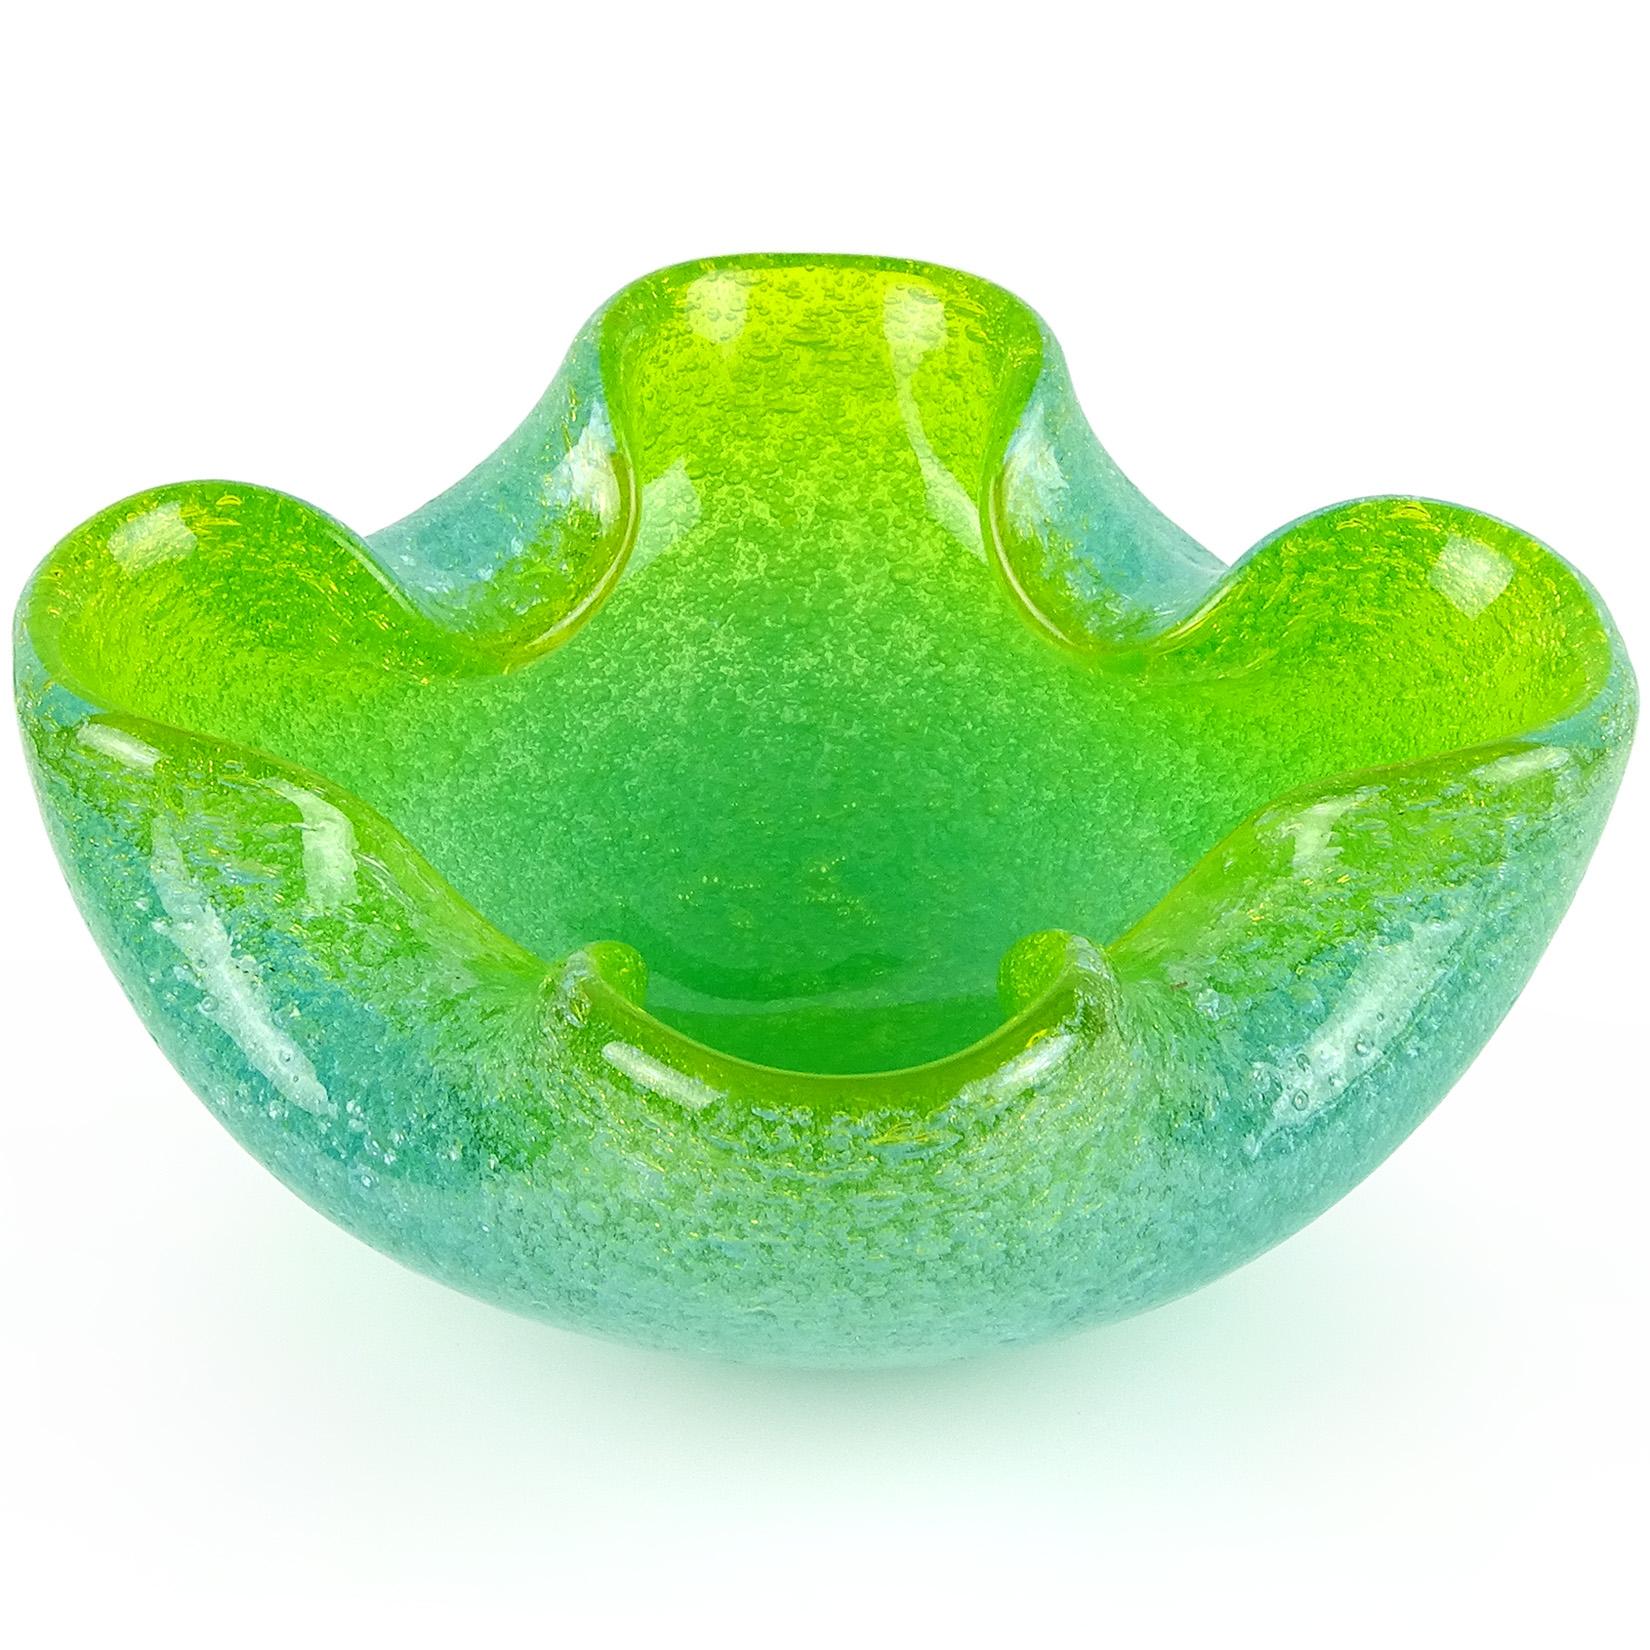 Beautiful vintage Murano hand blown sky blue over emerald green and bubbles Italian art glass bowl or dish. Documented to the Arte Vetraria Muranese company or A.Ve.M. It has a folded over rim on all 4 sides, and a very bright color. The bowl is